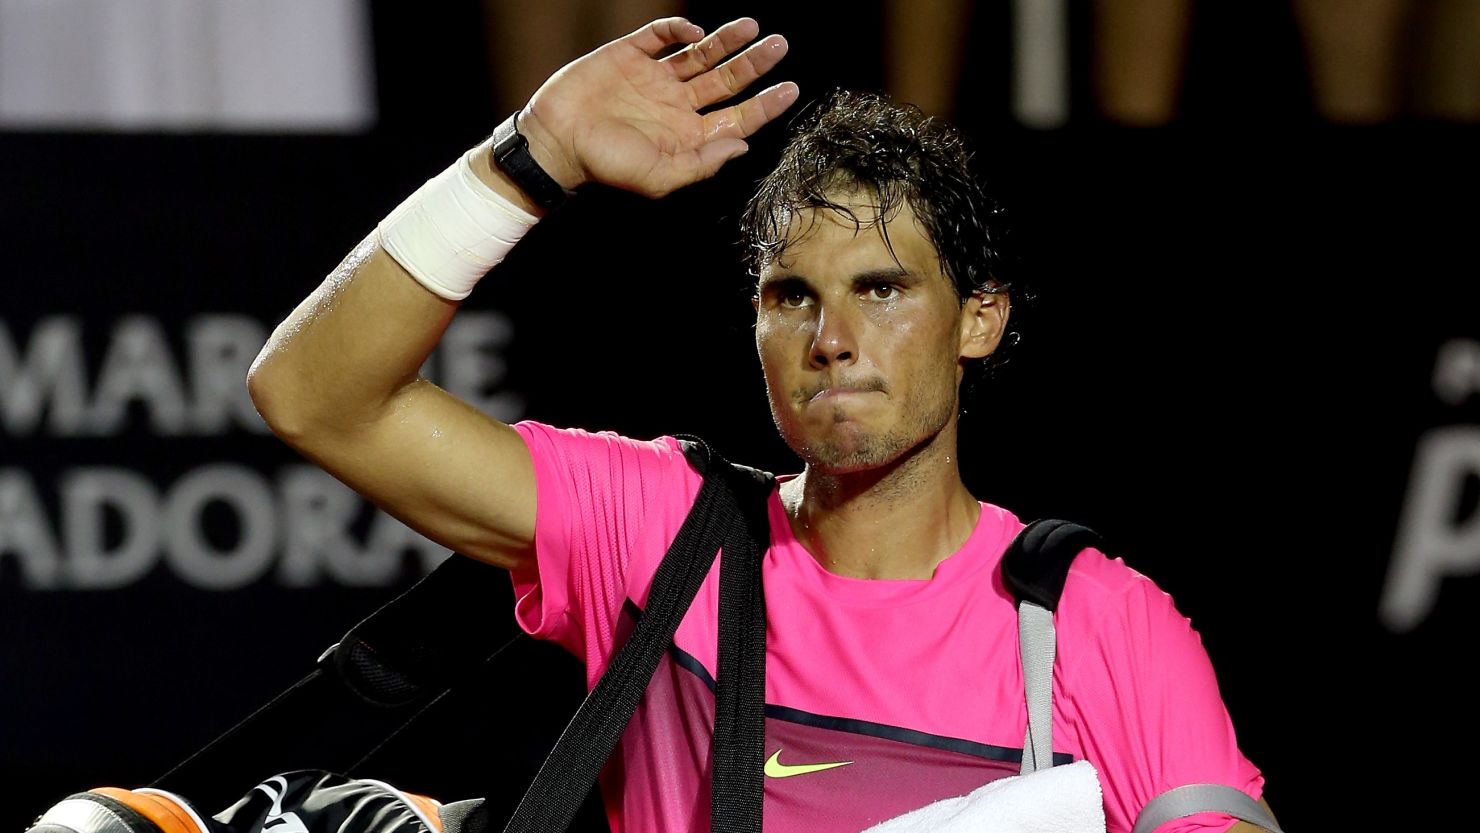 A weary Rafael Nadal waves goodbye to the crowd after his semifinal defeat in Rio to Fabio Fognini.